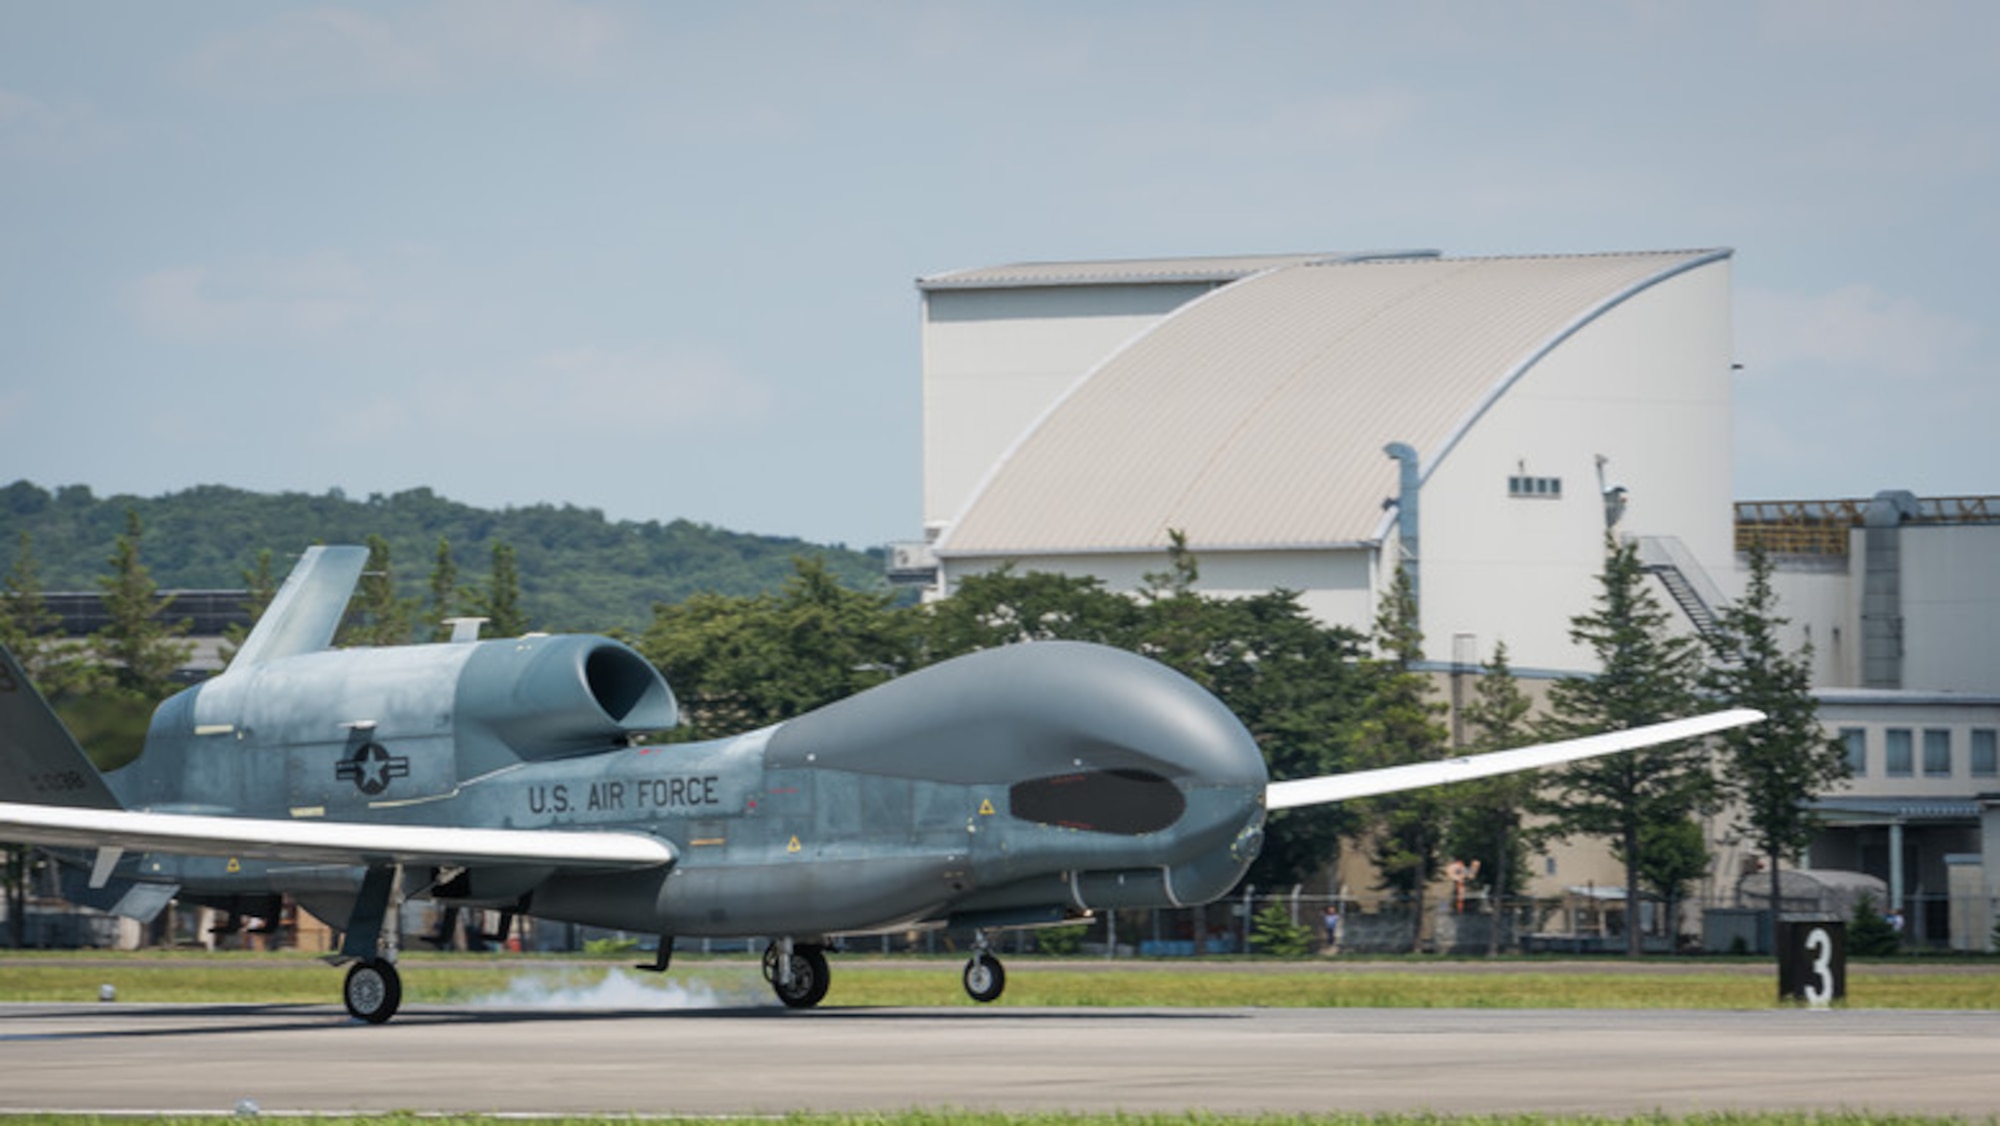 An RQ-4 Global Hawk, assigned to the 319th Operations Group, Detachment 1, Andersen Air Force Base, Guam, lands at Yokota Air Base, Japan, Aug. 5, 2019, for a rotational deployment. The movement maintains operations for Global Hawks during months of inclement weather endured at Andersen AFB, such as typhoons and other scenarios which have the potential to hinder readiness. (U.S. Air Force photo by Senior Airman Juan Torres)